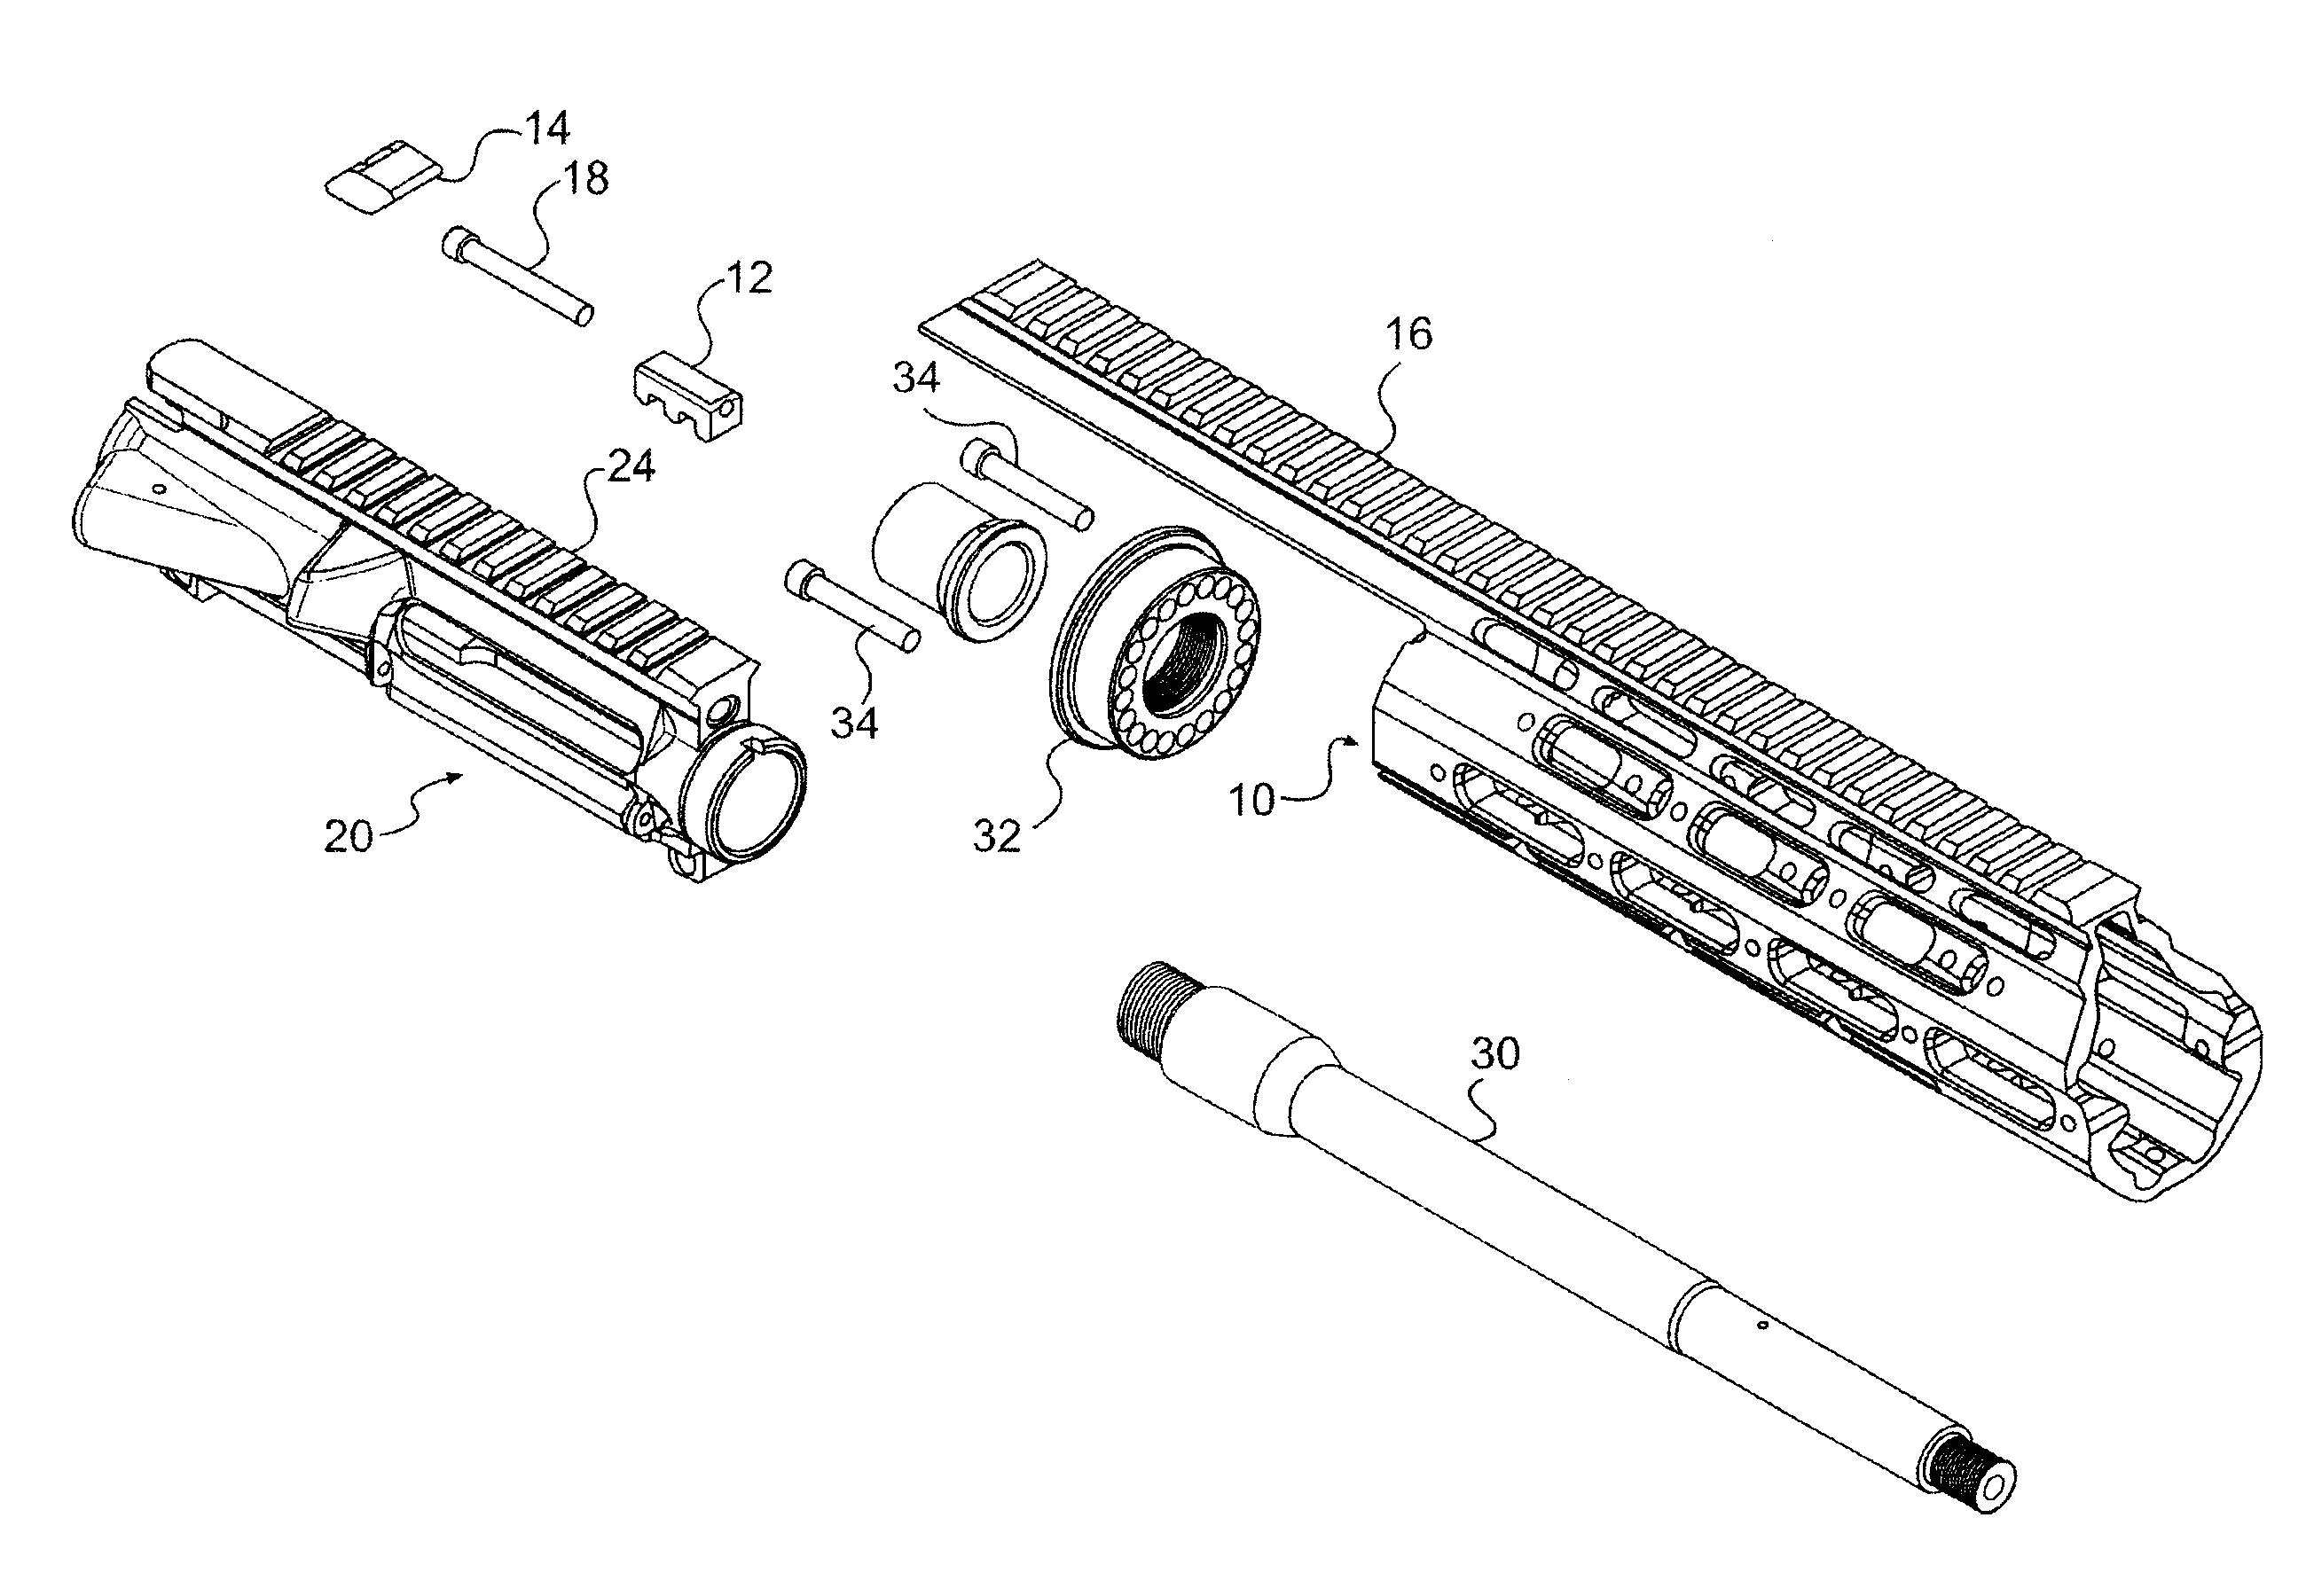 Hand guard attachment system for firearms